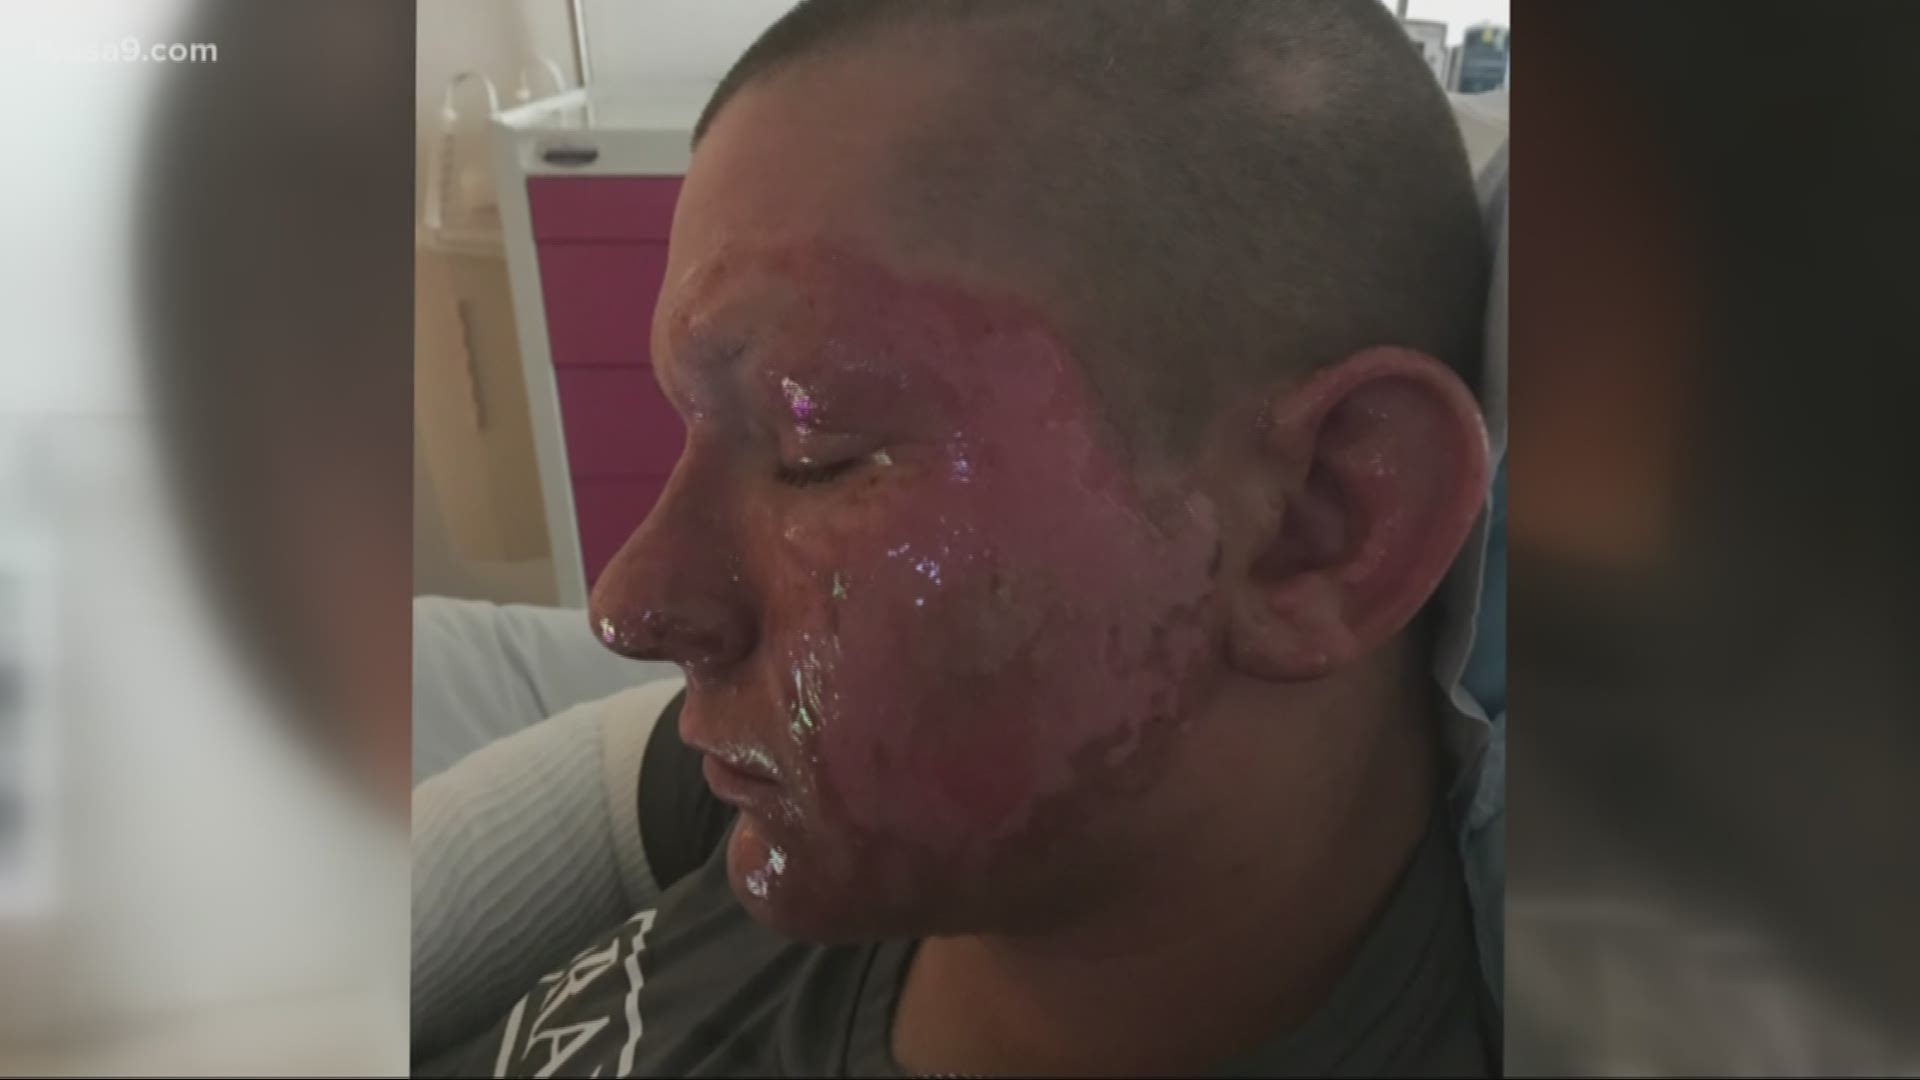 The Virginia teenager severely injured by giant hogweed one week ago, is home from the hospital recovering after the toxic plant removed chucks of his skin.   